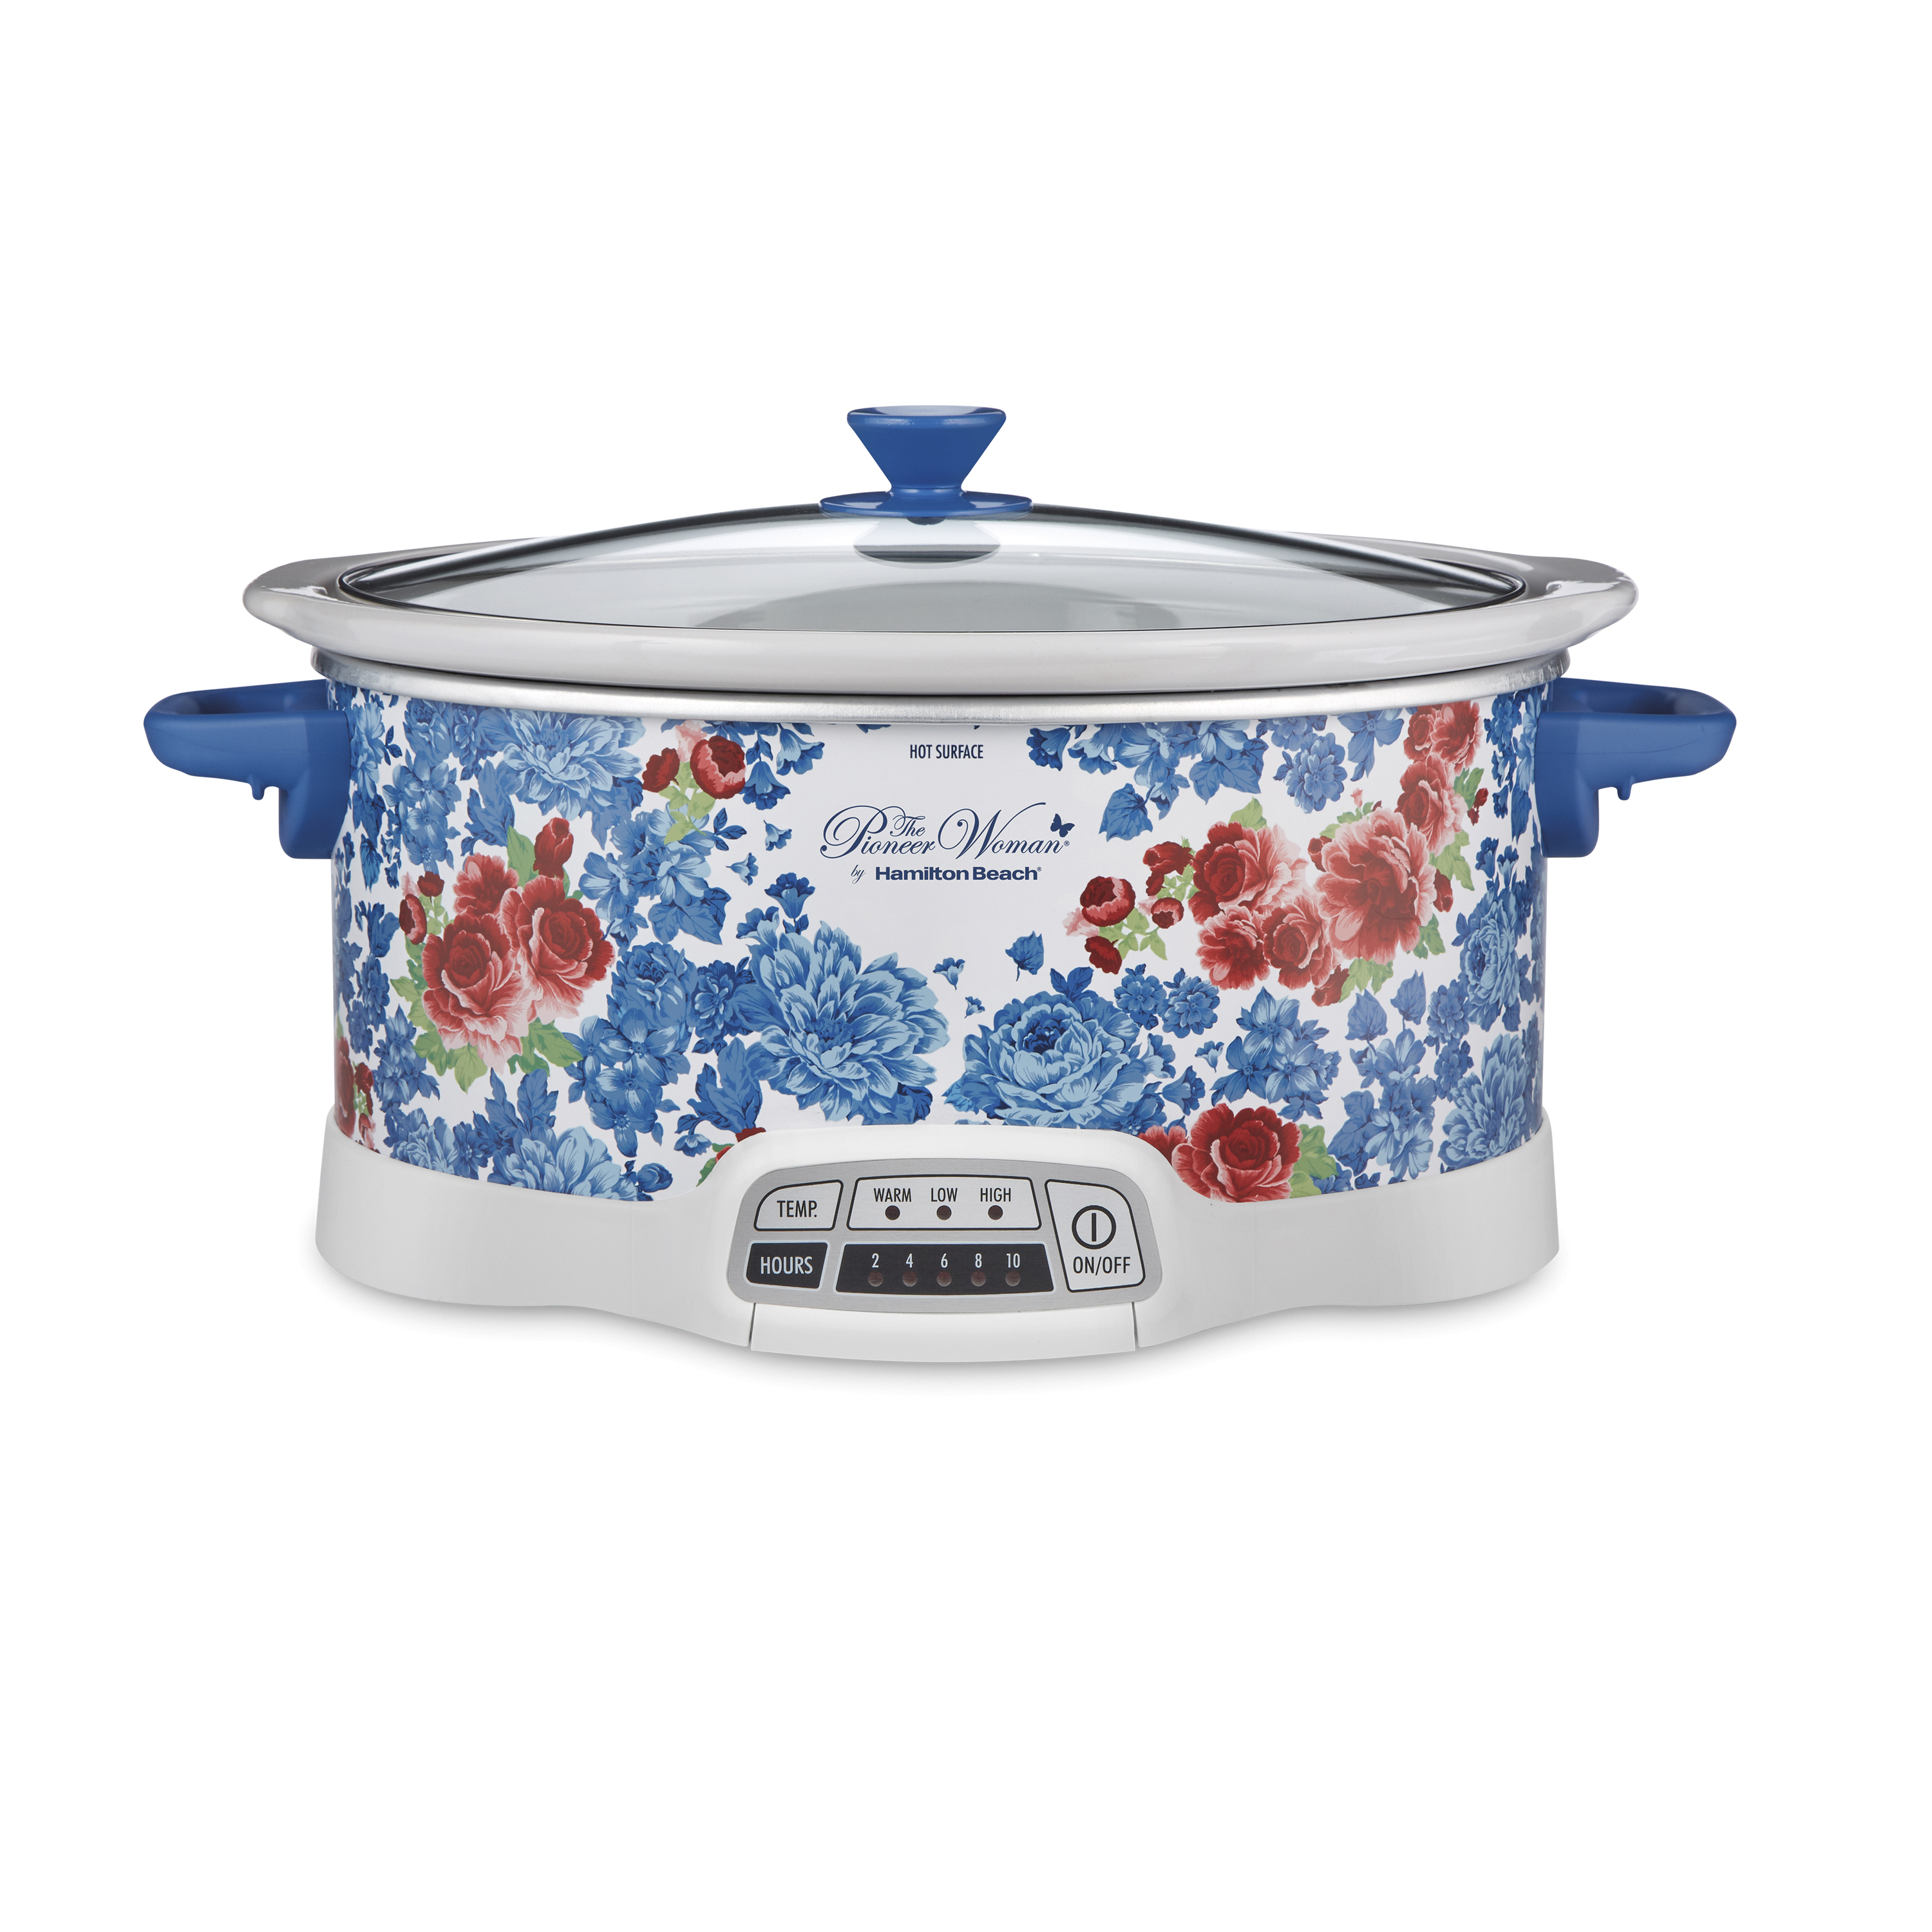 The Pioneer Woman Programmable Slow Cooker, 7 Quart Capacity, Removable Crock, Frontier Rose, 33679 - image 1 of 4